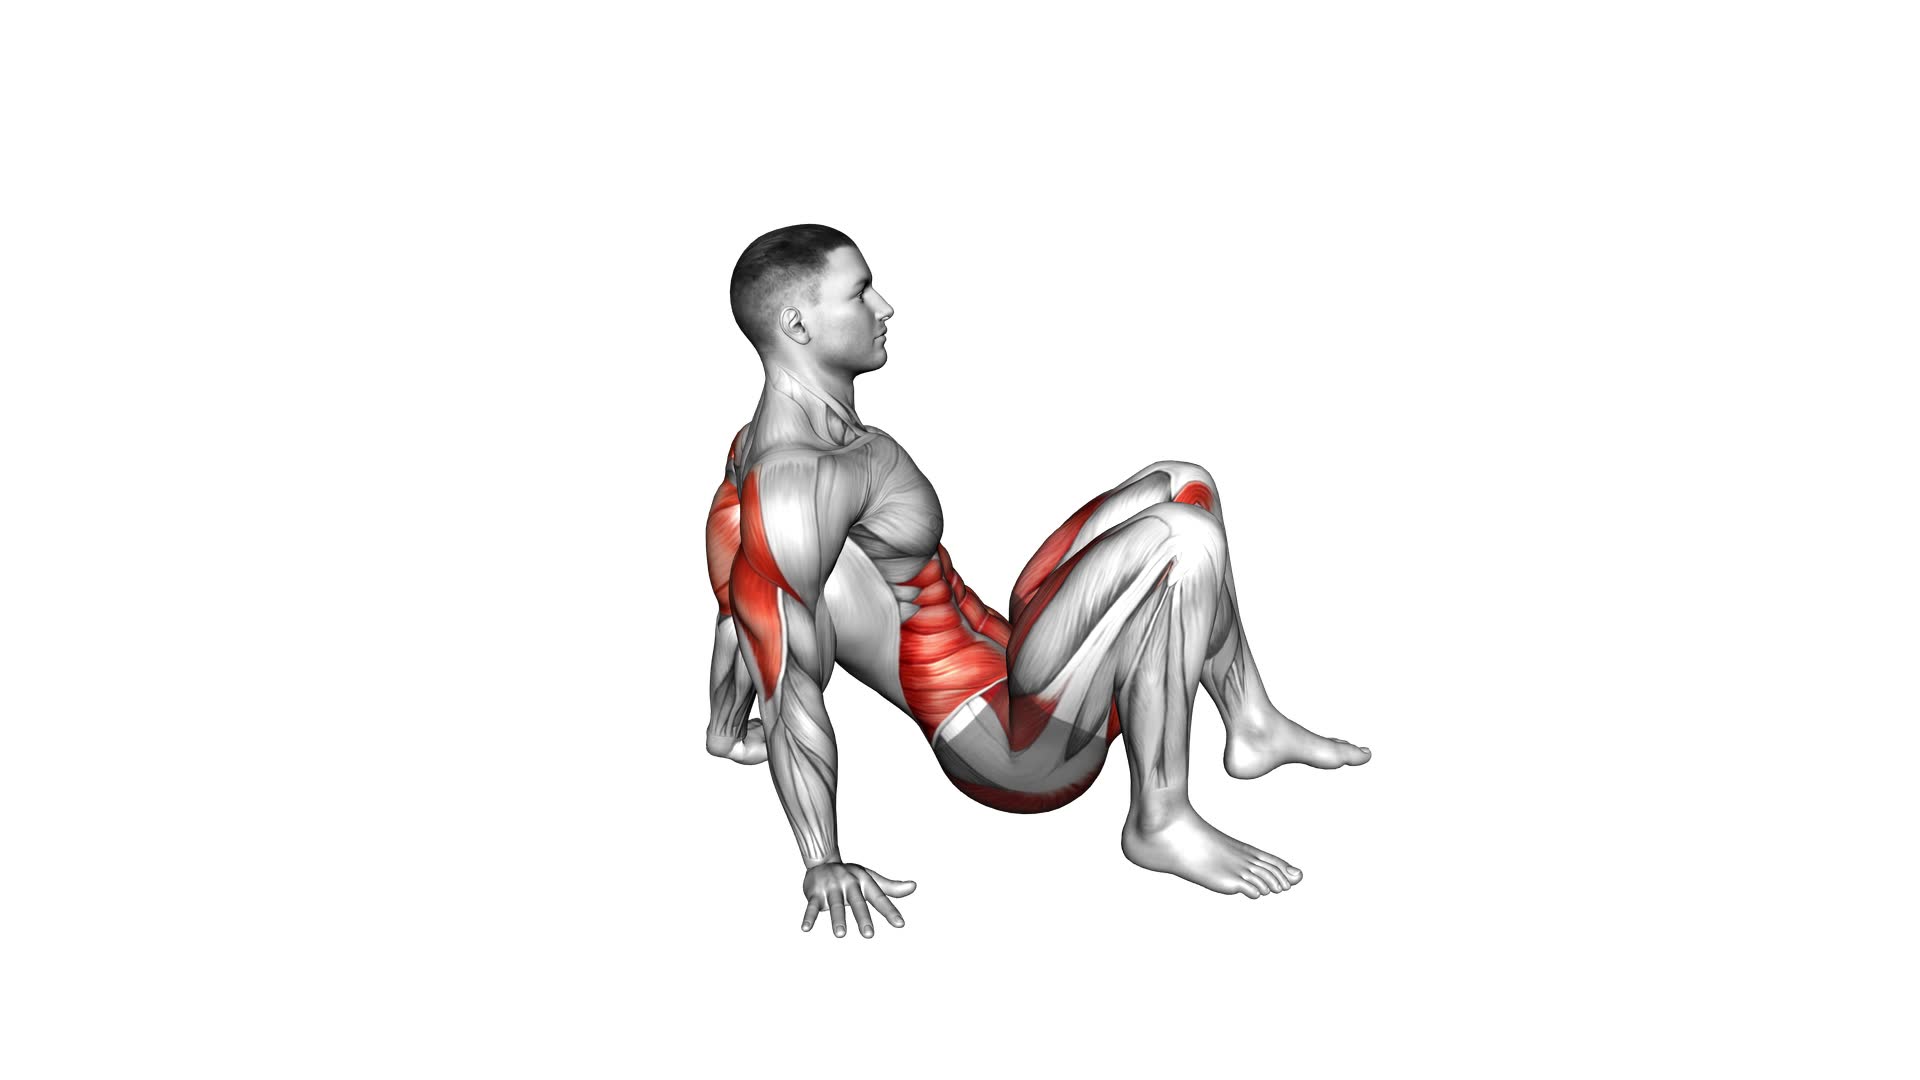 Crab Walk (VERSION 2) (male) - Video Exercise Guide & Tips